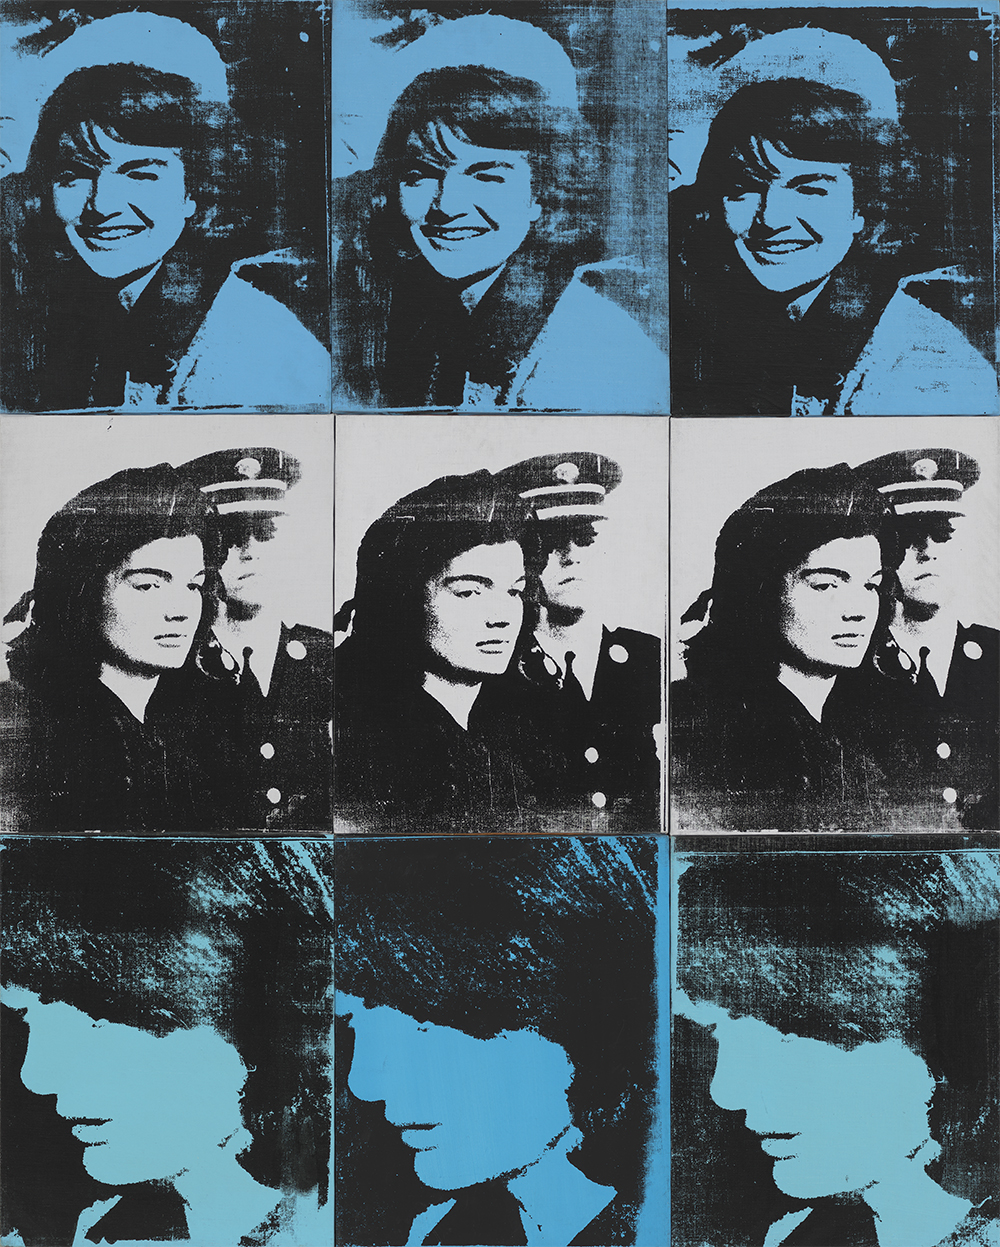 Andy Warhol (1928–1987), Nine Jackies, 1964. Acrylic and silkscreen ink on linen, nine panels: 60 3⁄8 × 48 1⁄4 in. (153.4 × 122.6 cm) overall. Whitney Museum of American Art, New York; gift of The American Contemporary Art Foundation, Inc. Leonard A. Lauder, President 2002.273 © The Andy Warhol Foundation for the Visual Arts, Inc. / Artists Rights Society (ARS) New York